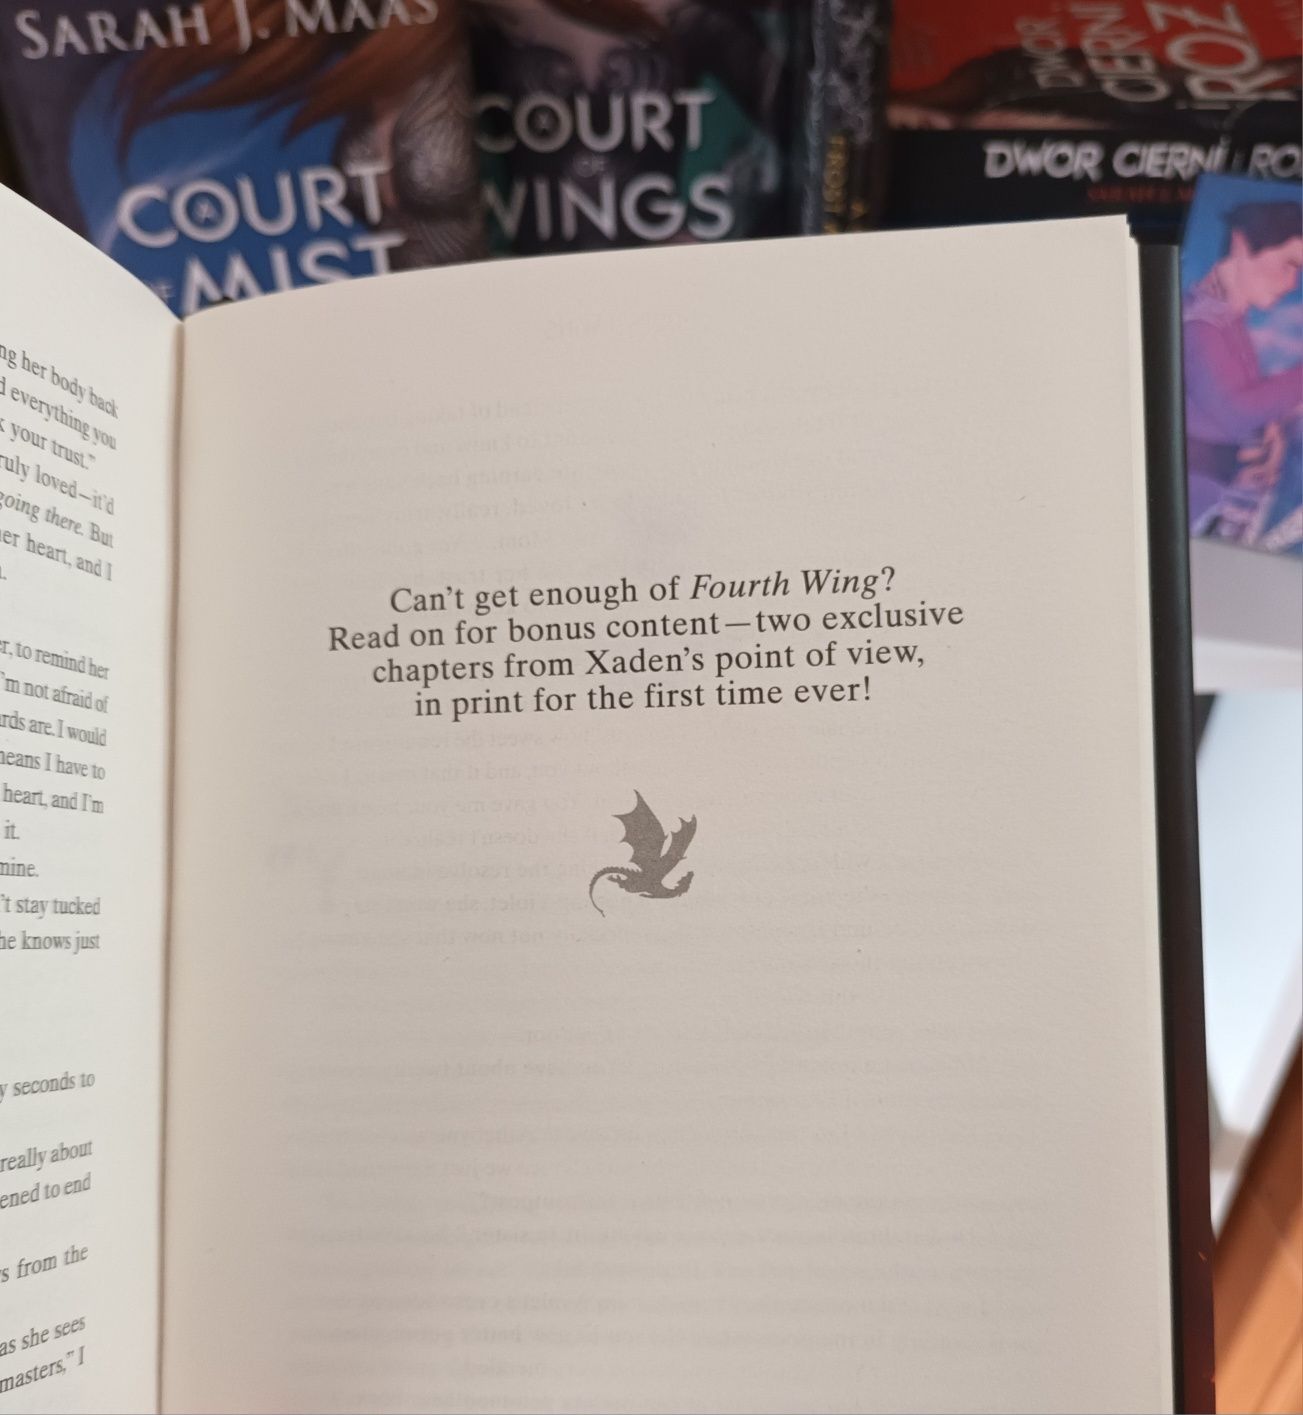 Fourth Wing Waterstones Exclusive Edition - Rebecca Yarros